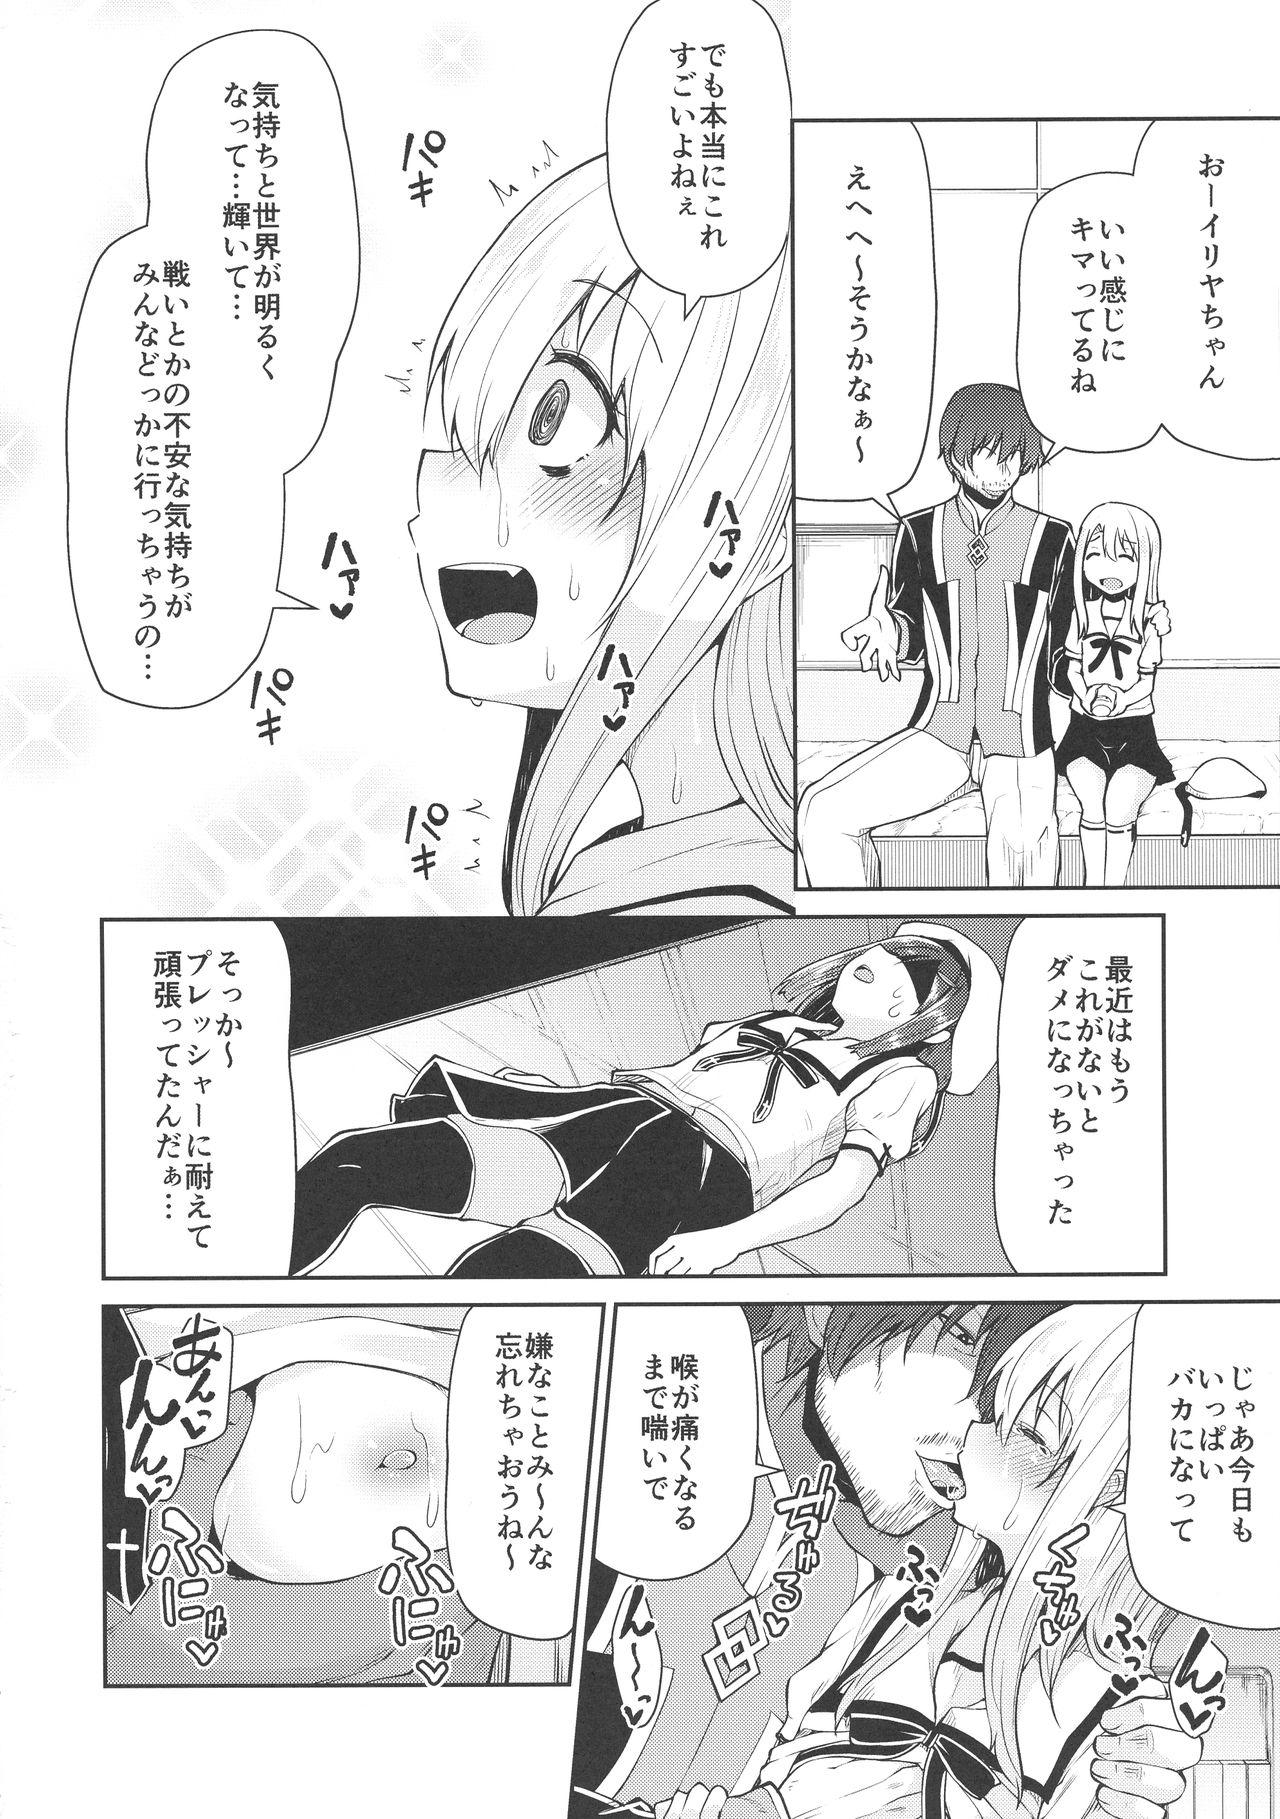 Office Fuck Mahou Shoujo to Shiawase Game - Magical Girl and Happiness Game - Fate kaleid liner prisma illya Mommy - Page 7